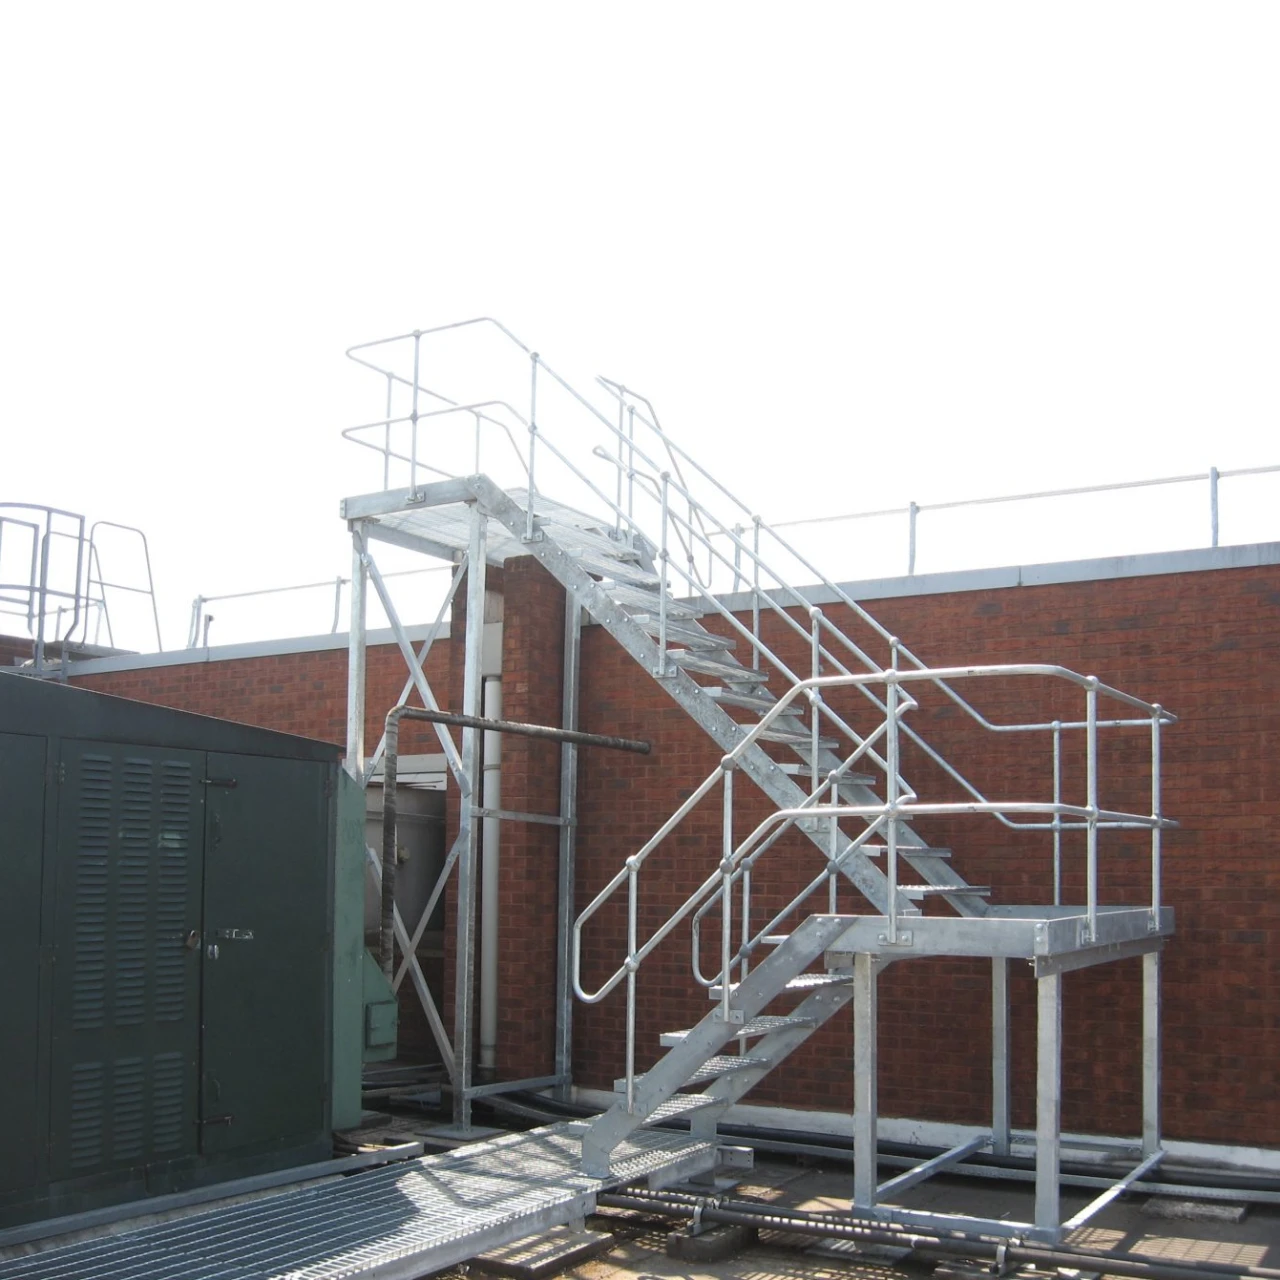 Steps & Stairs Inspection - Fire Escape Testing - Asda Tilbury Staircase